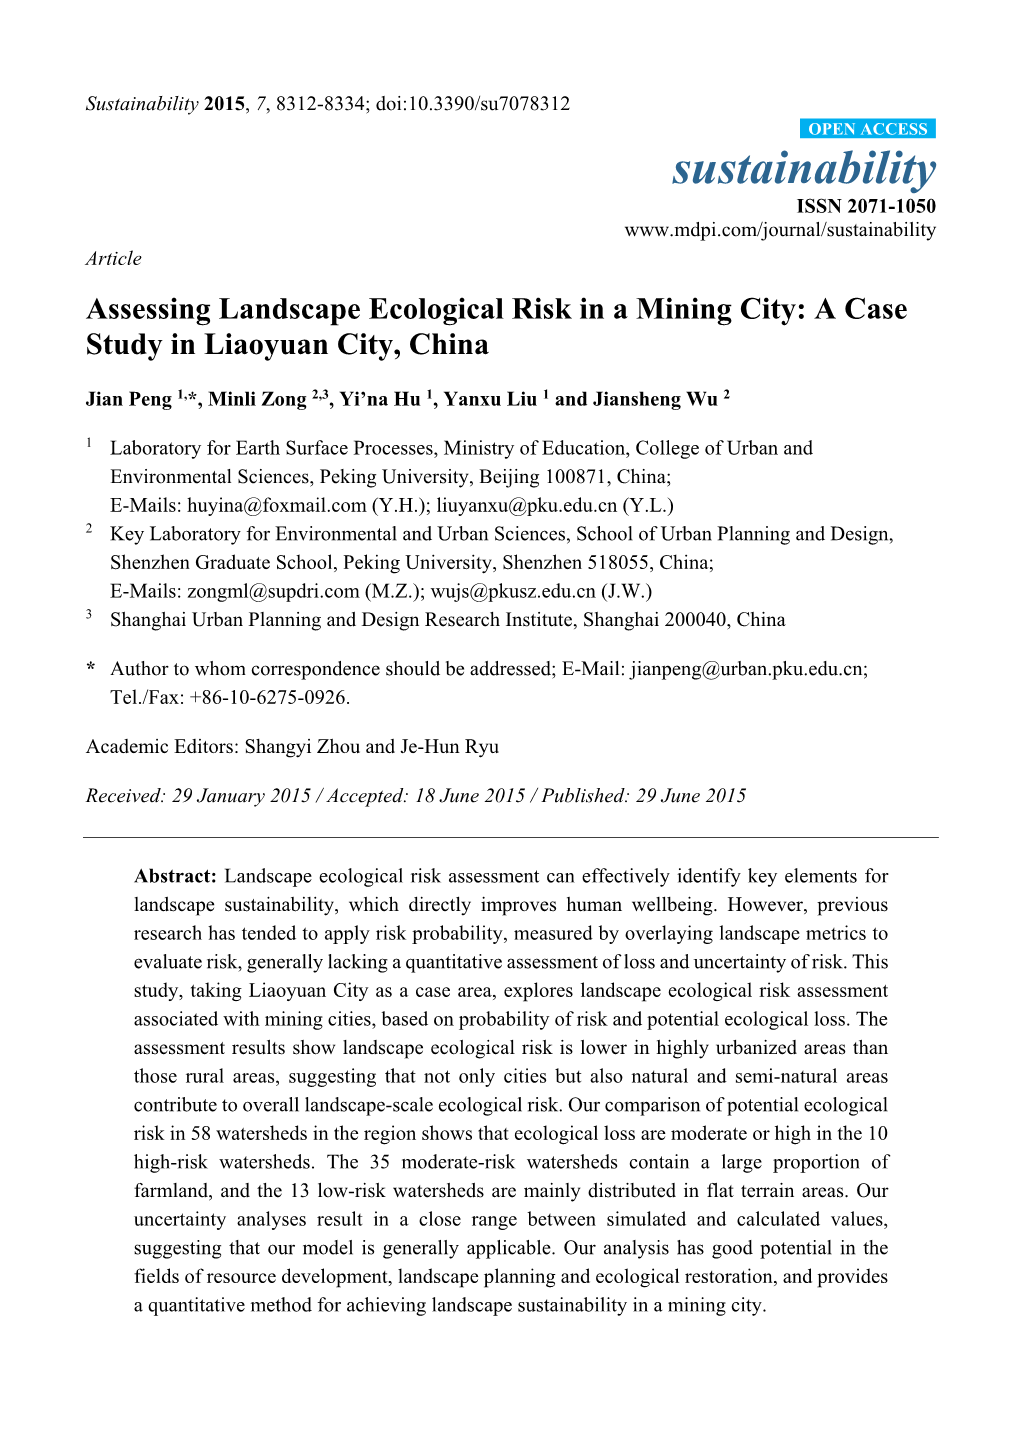 Assessing Landscape Ecological Risk in a Mining City: a Case Study in Liaoyuan City, China